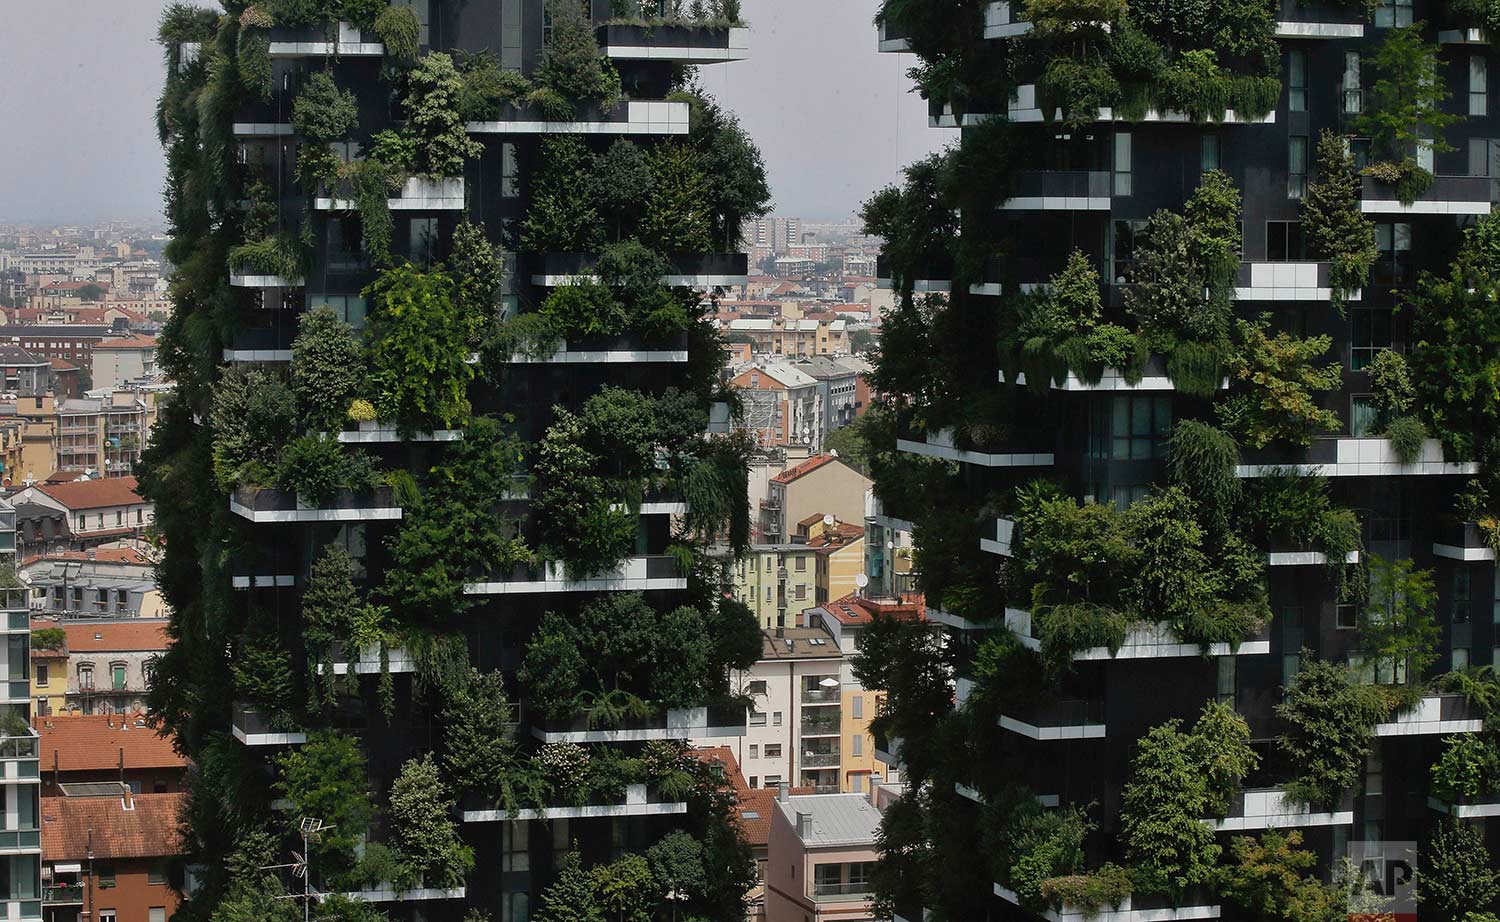  The twin towers of the Bosco Verticale (Vertical Forest) residential buildings at the Porta Nuova district, rise above Milan, Italy, on Thursday, Aug. 3, 2017. (AP Photo/Luca Bruno) 